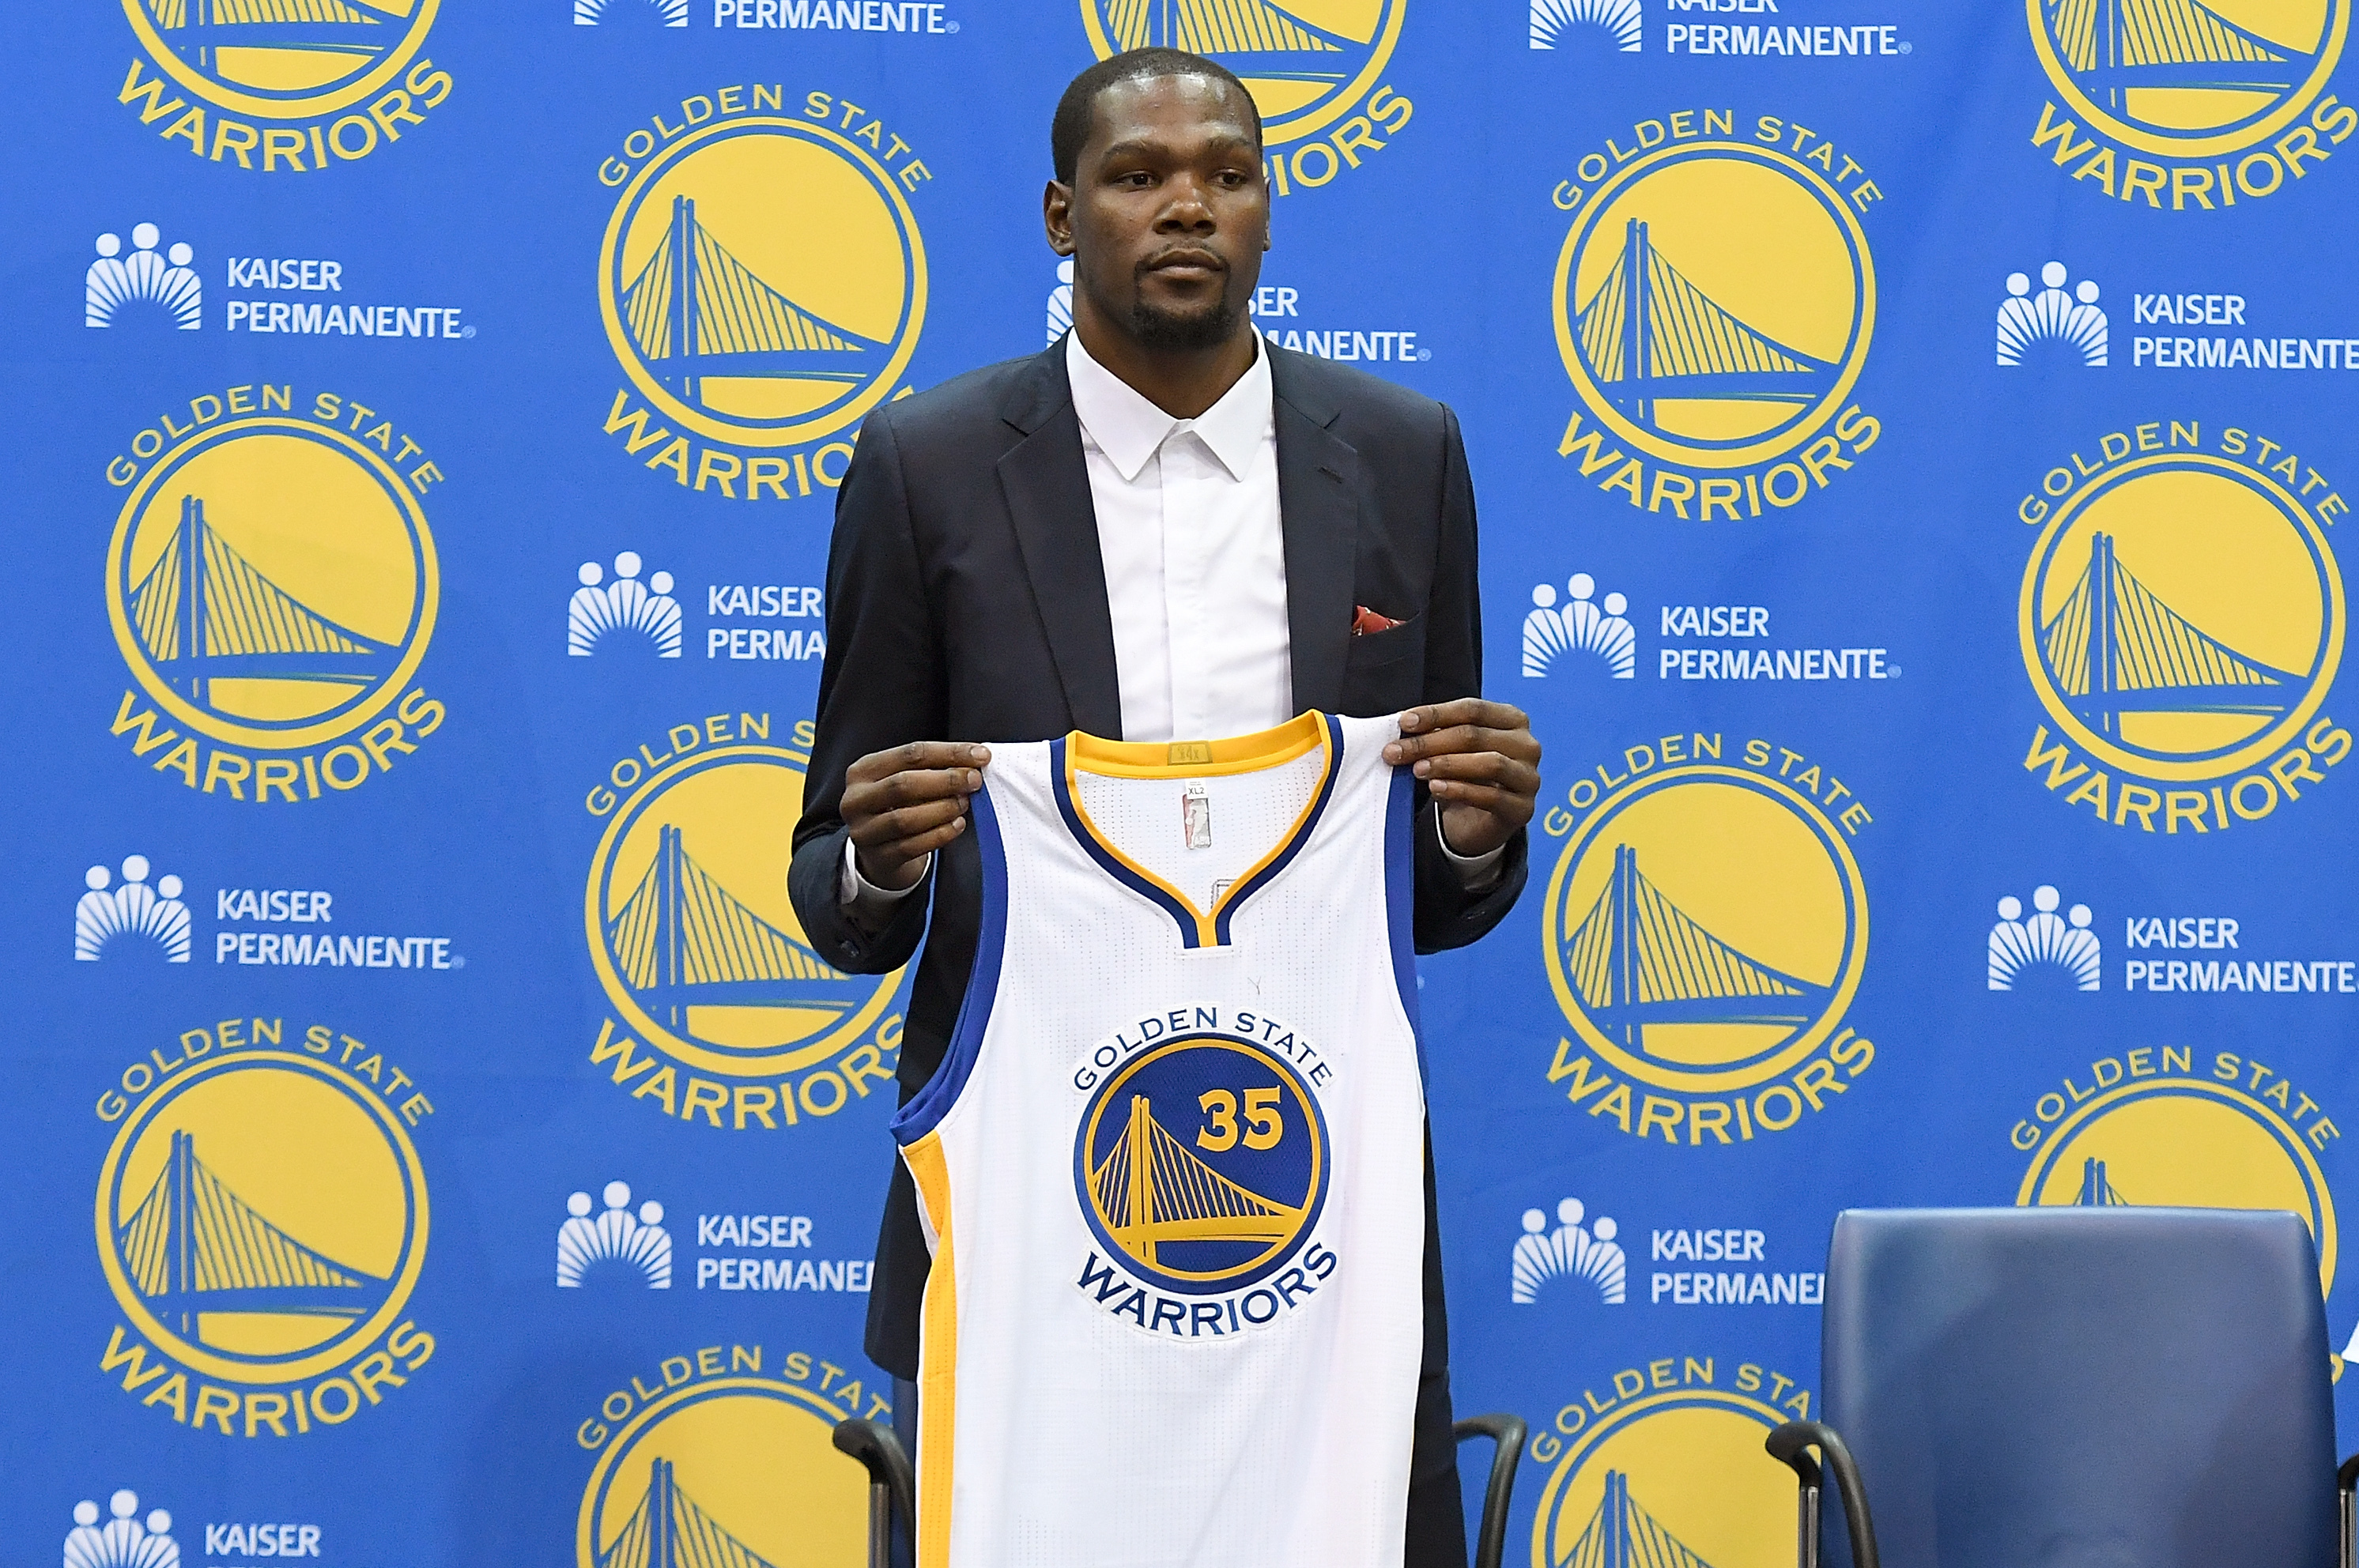 Kevin Durant signs with the Golden State Warriors (July 2016